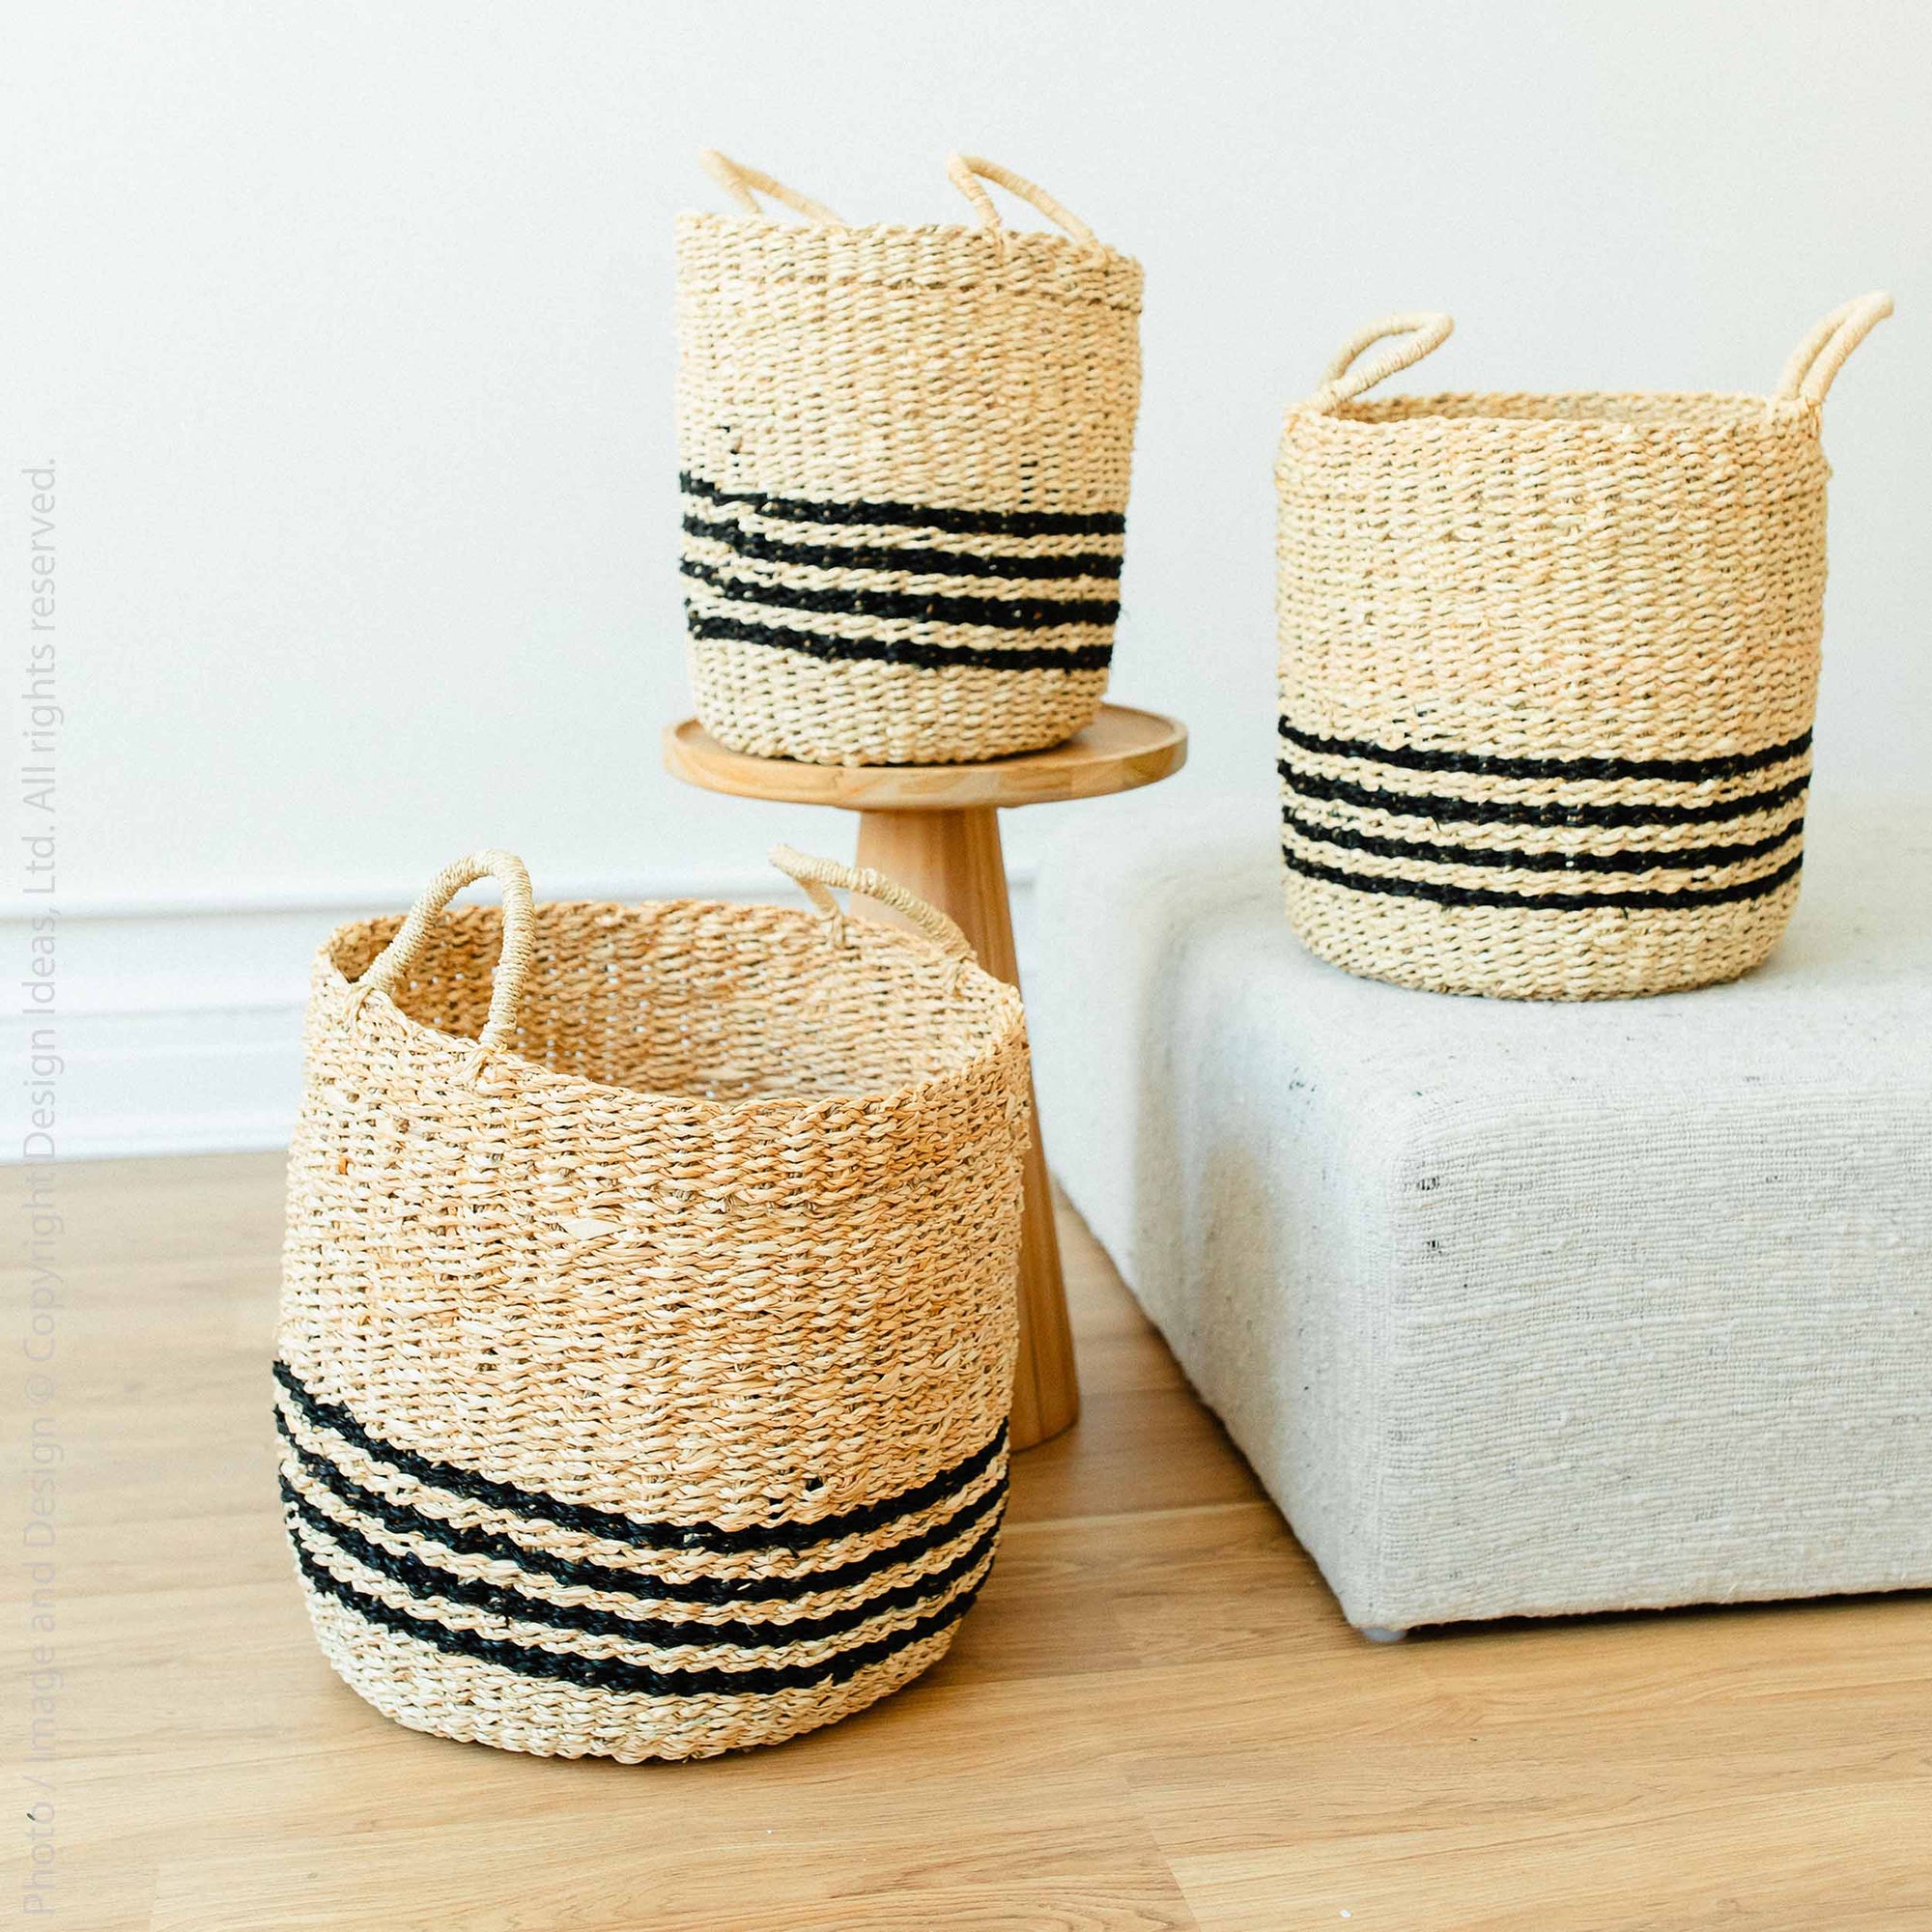 Scarborough™ Woven Seagrass Baskets (set of 3)